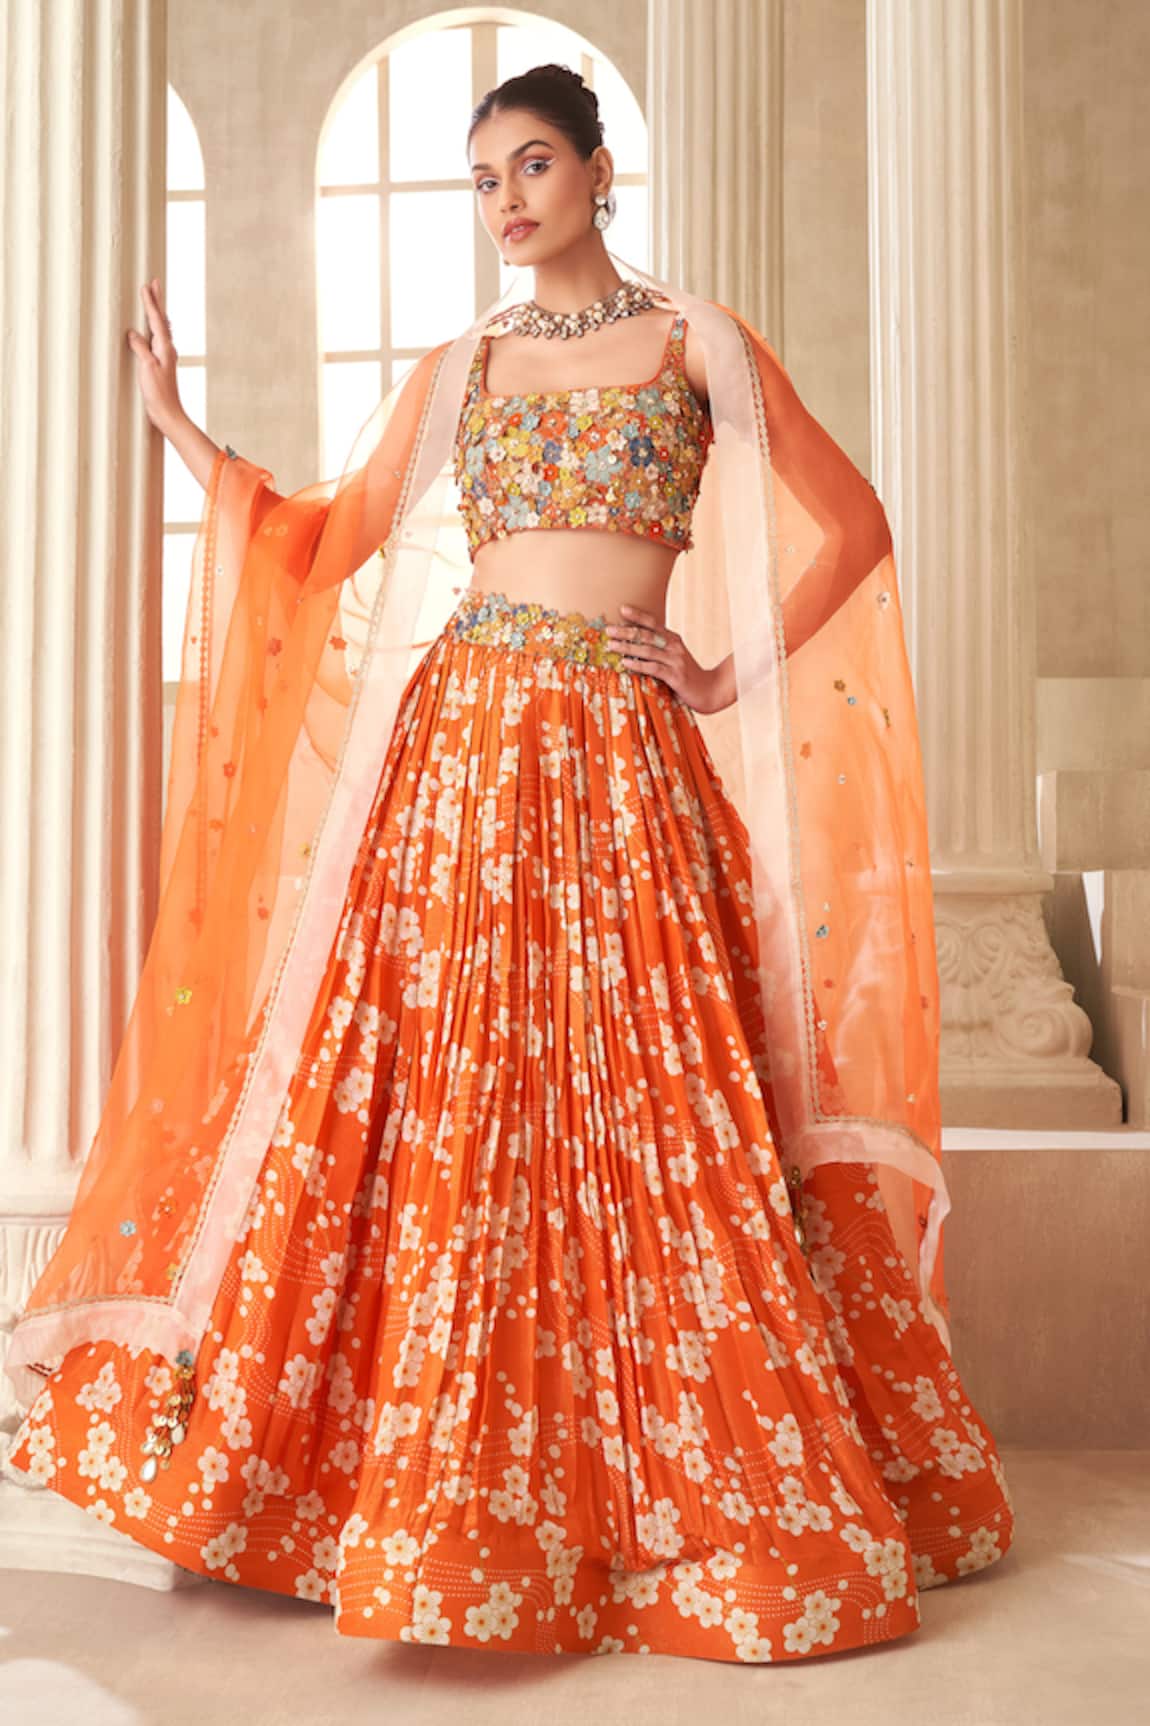 15812 ORGANZA NET SEQUENCE EMBROIDERY BUY ONLINE LATEST EXCLUSIVE GLAMOROUS  SIZZLING HOT WEDDING BRIDAL RECEPTION SPECIAL PARTY WEAR READYMADE LEHENGA  CHOLI BOLLYWOOD DRESSES ON REEWAZ ...